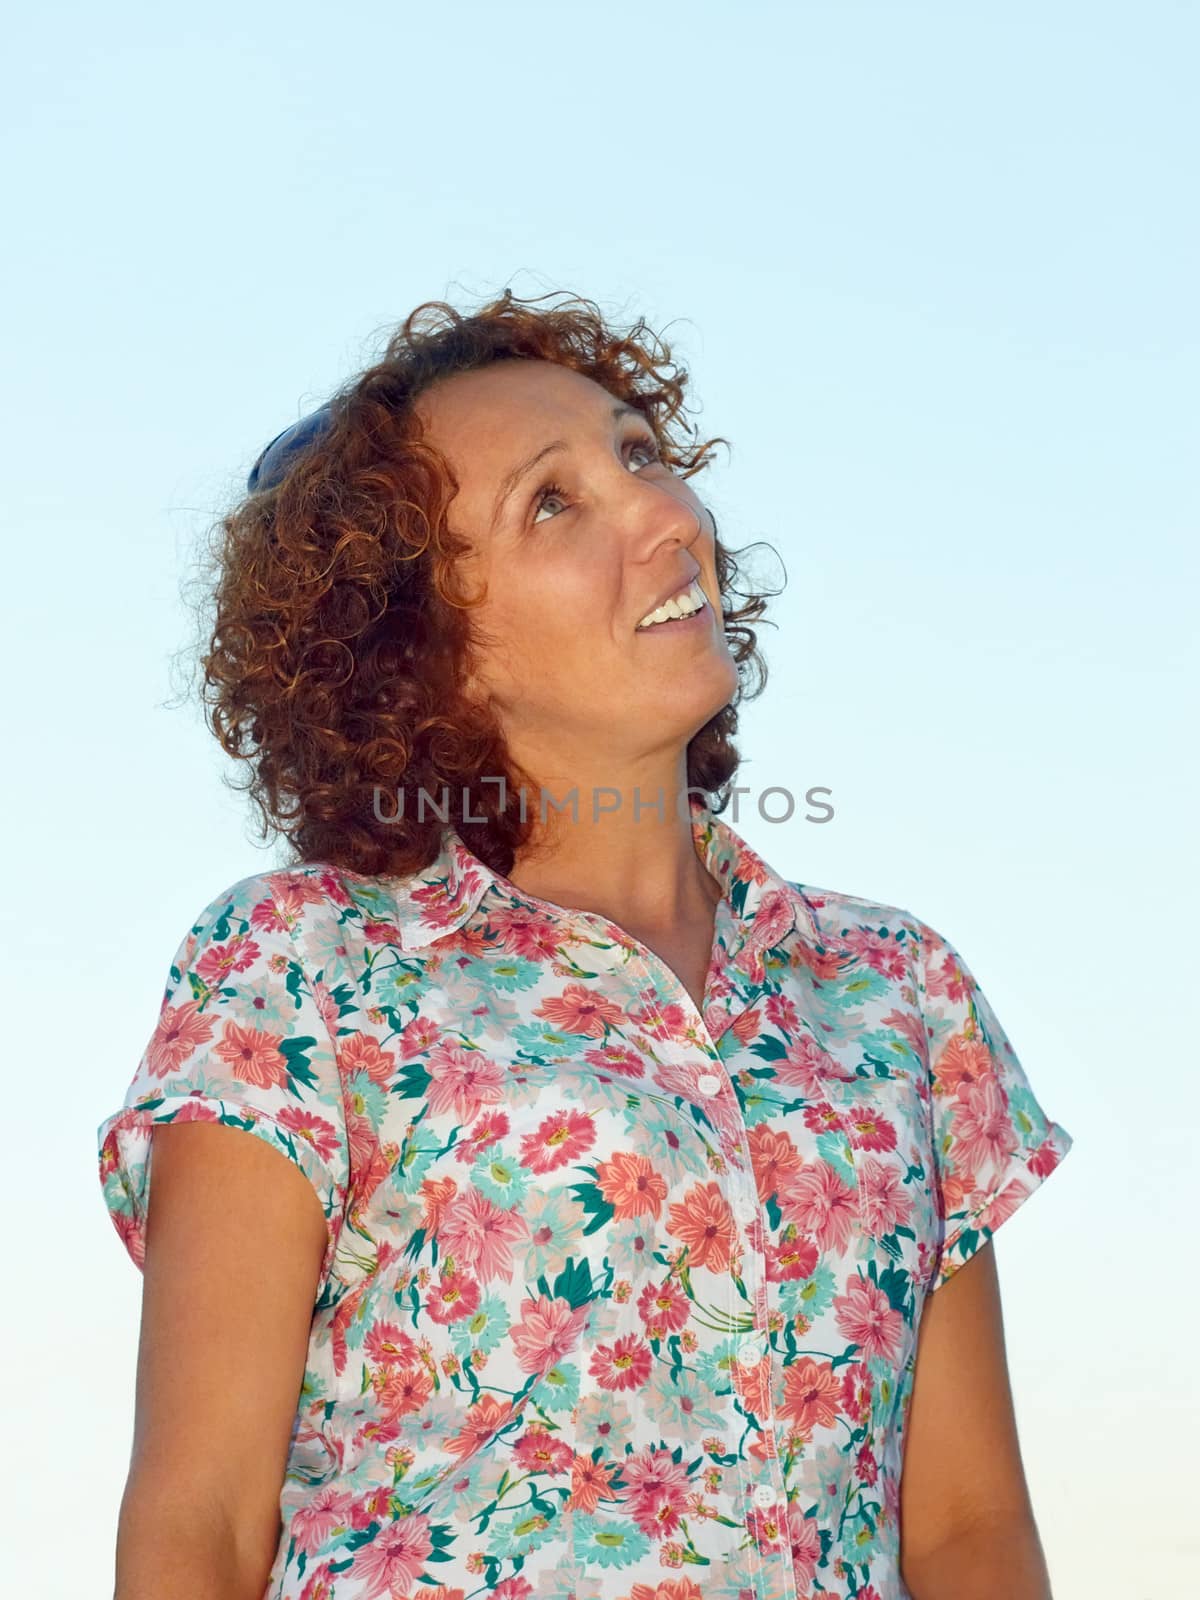 Joyful woman smiling and looking up against a light blue evening sky